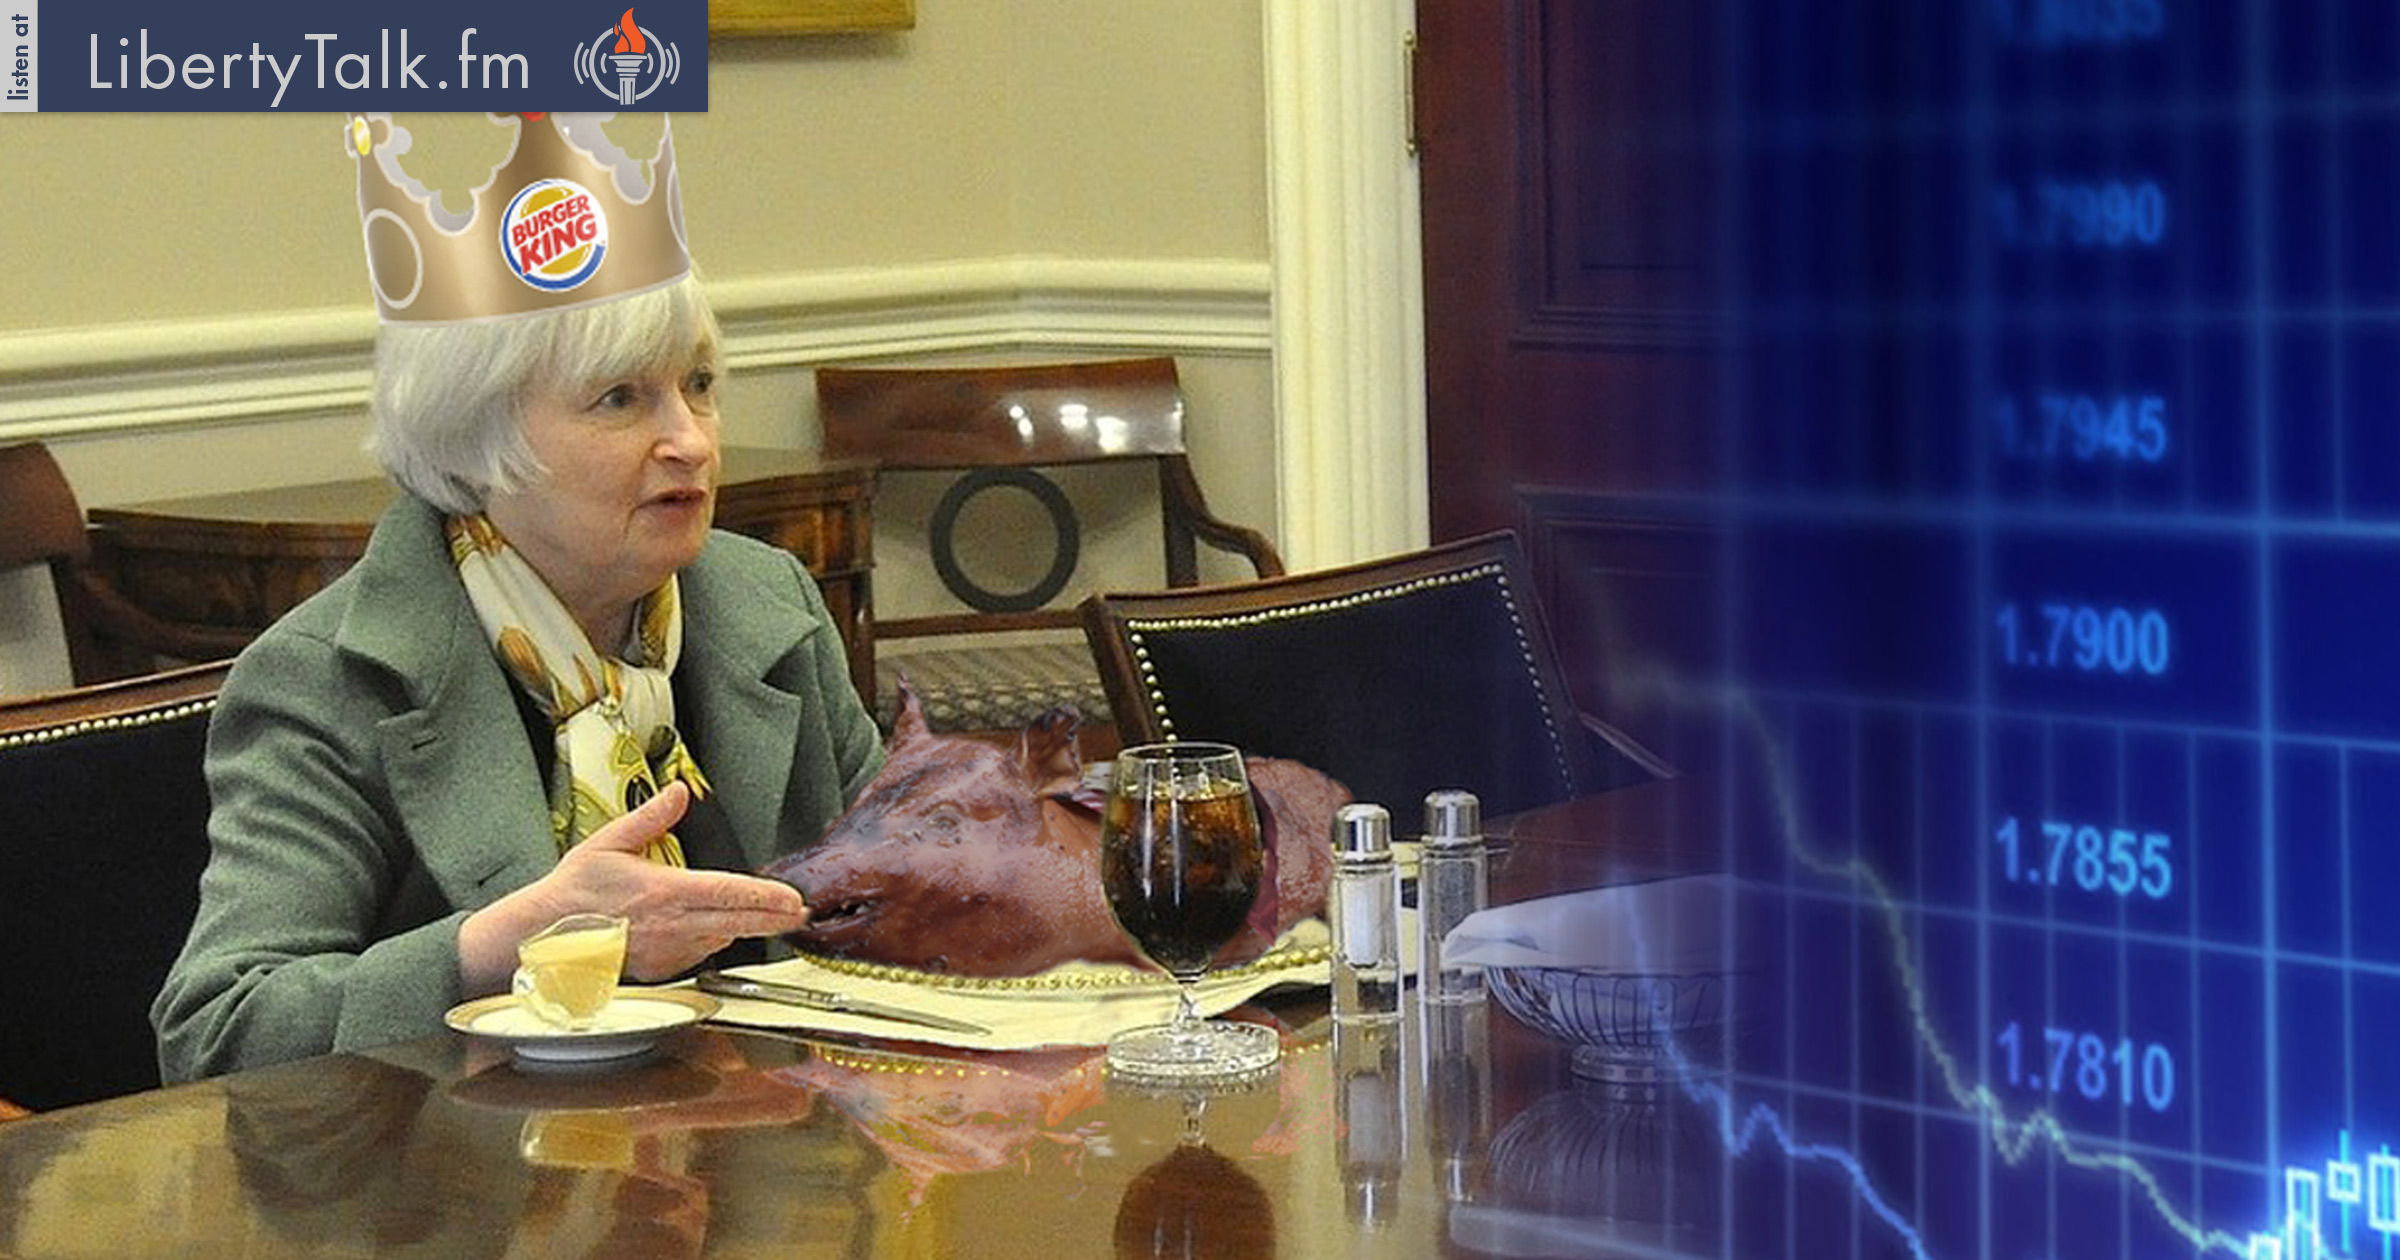 Janet Yellen dines on Roast Pig in celebration of another year of receiving income tax payment from U.S. Government as interest for loans extended by FEDERAL RESERVE